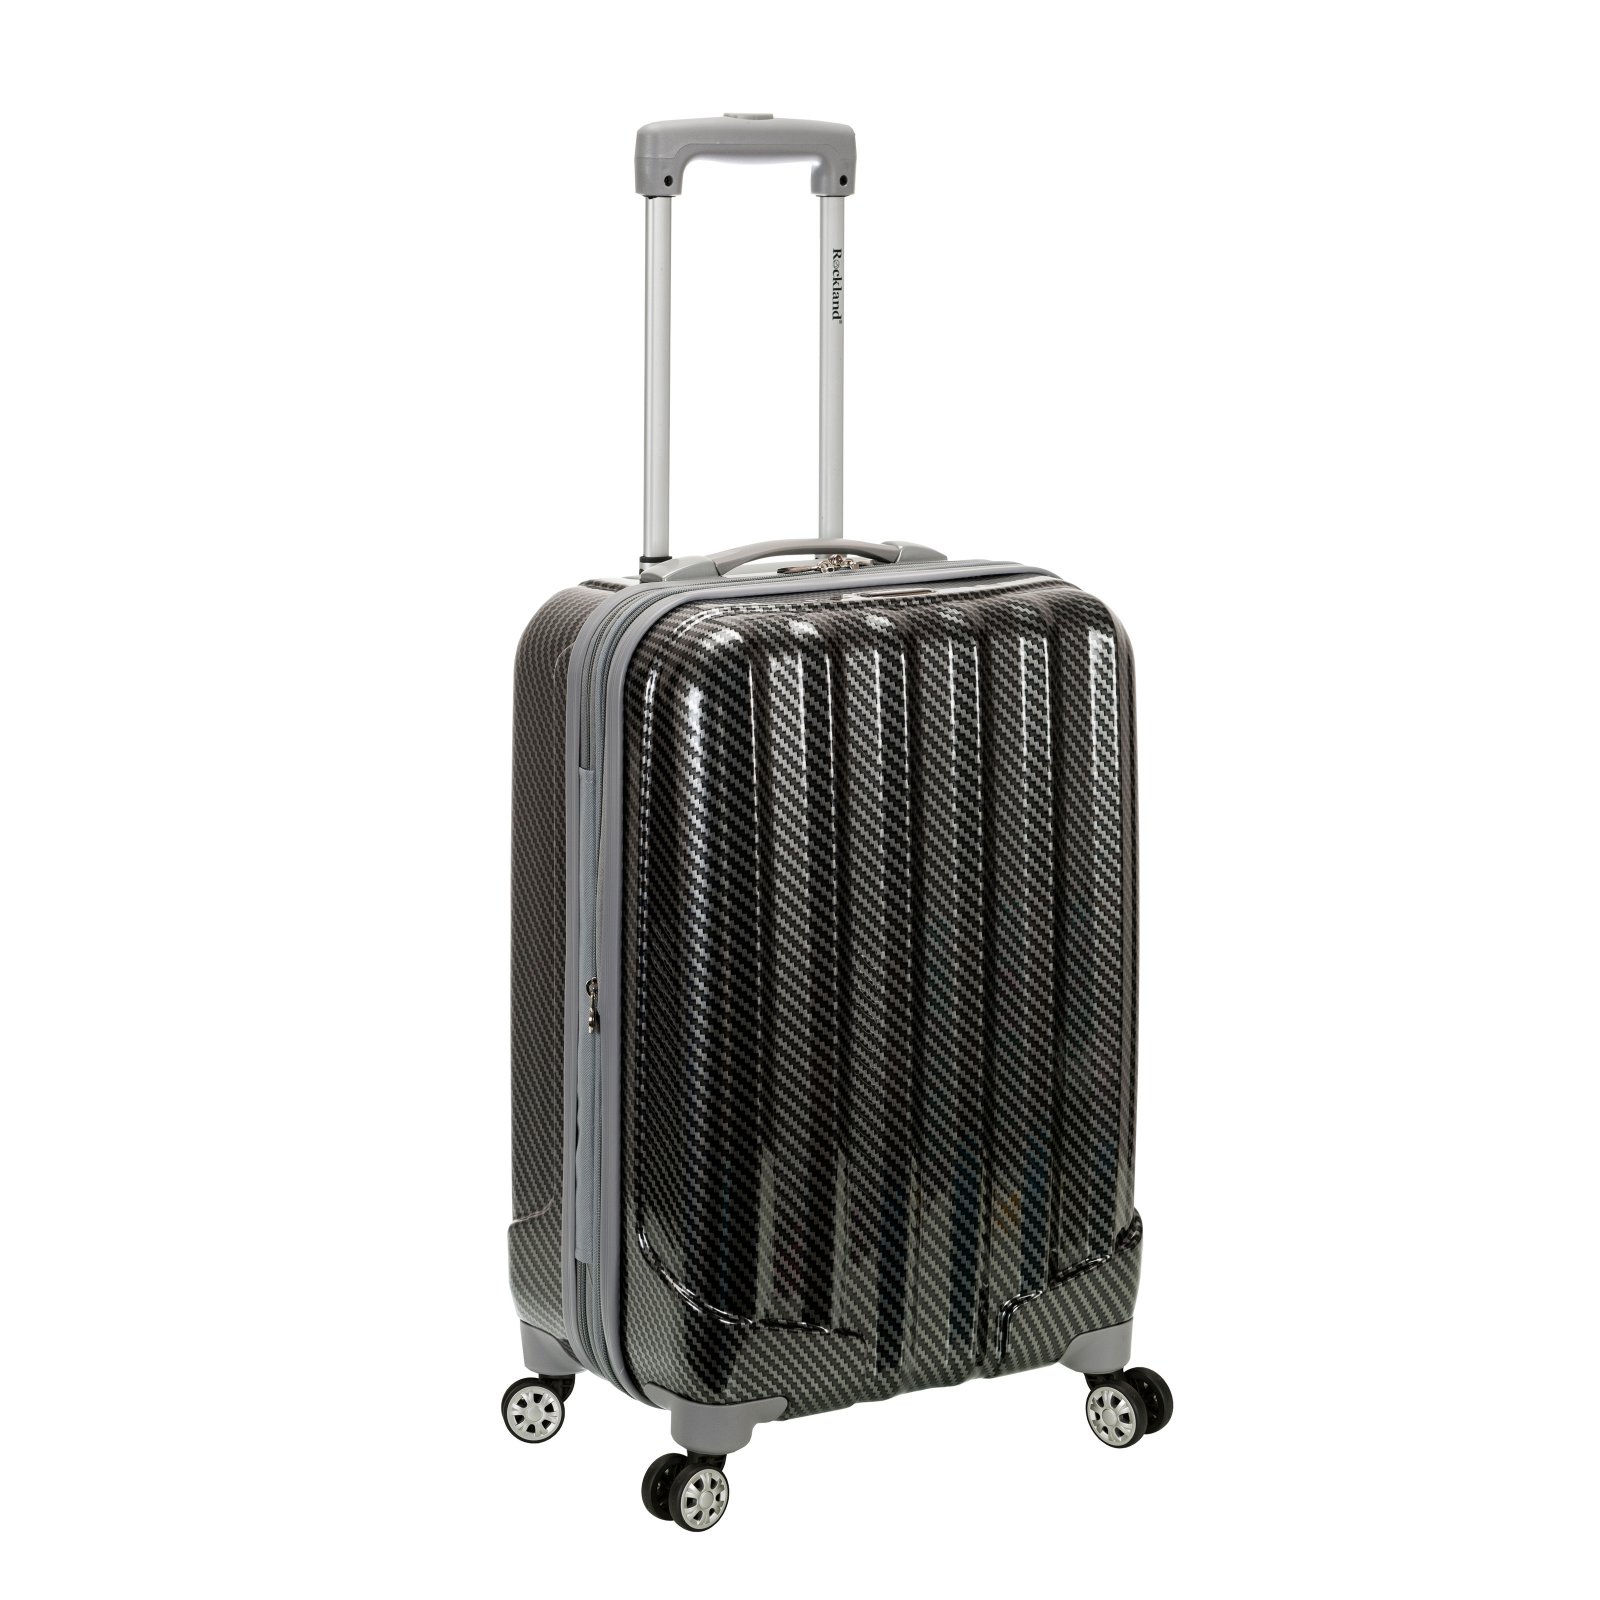 Rockland Luggage F145 Melbourne 20 in. Expandable ABS Carry On Luggage - image 3 of 4